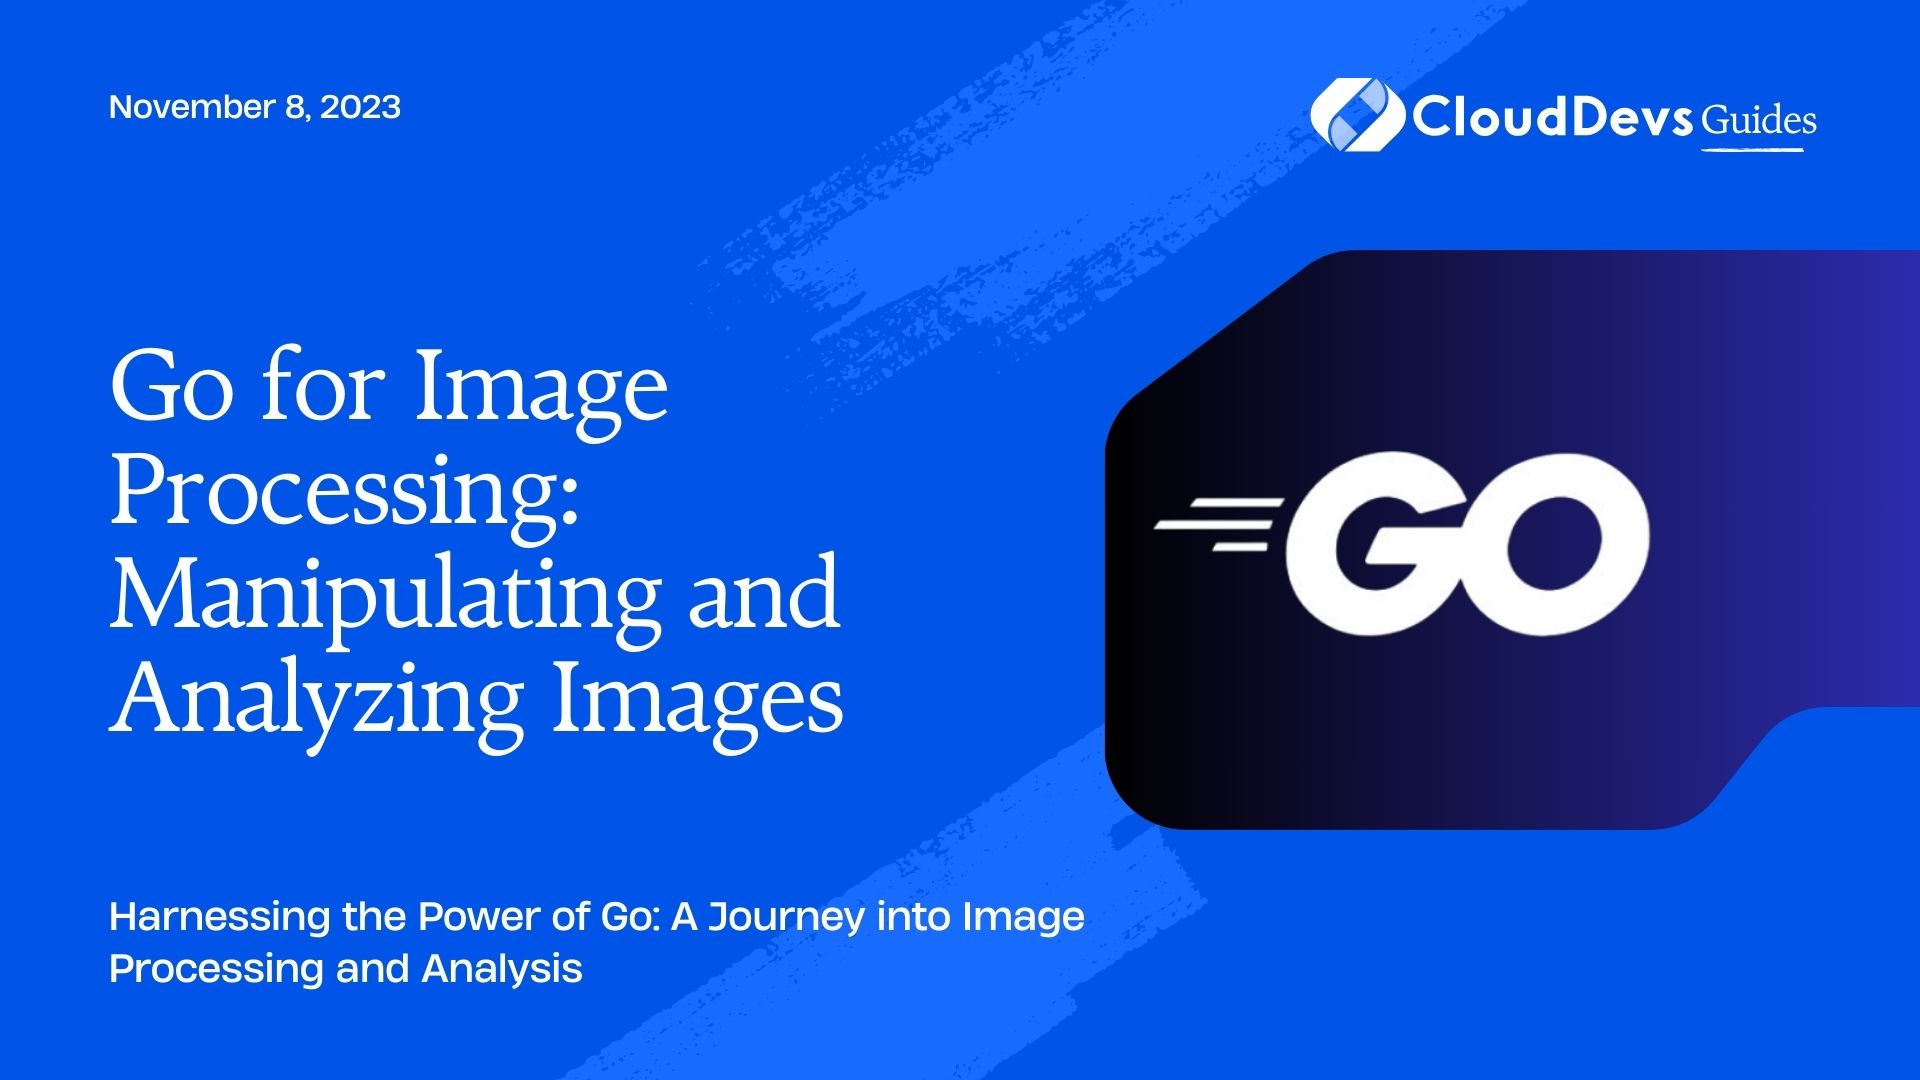 Go for Image Processing: Manipulating and Analyzing Images